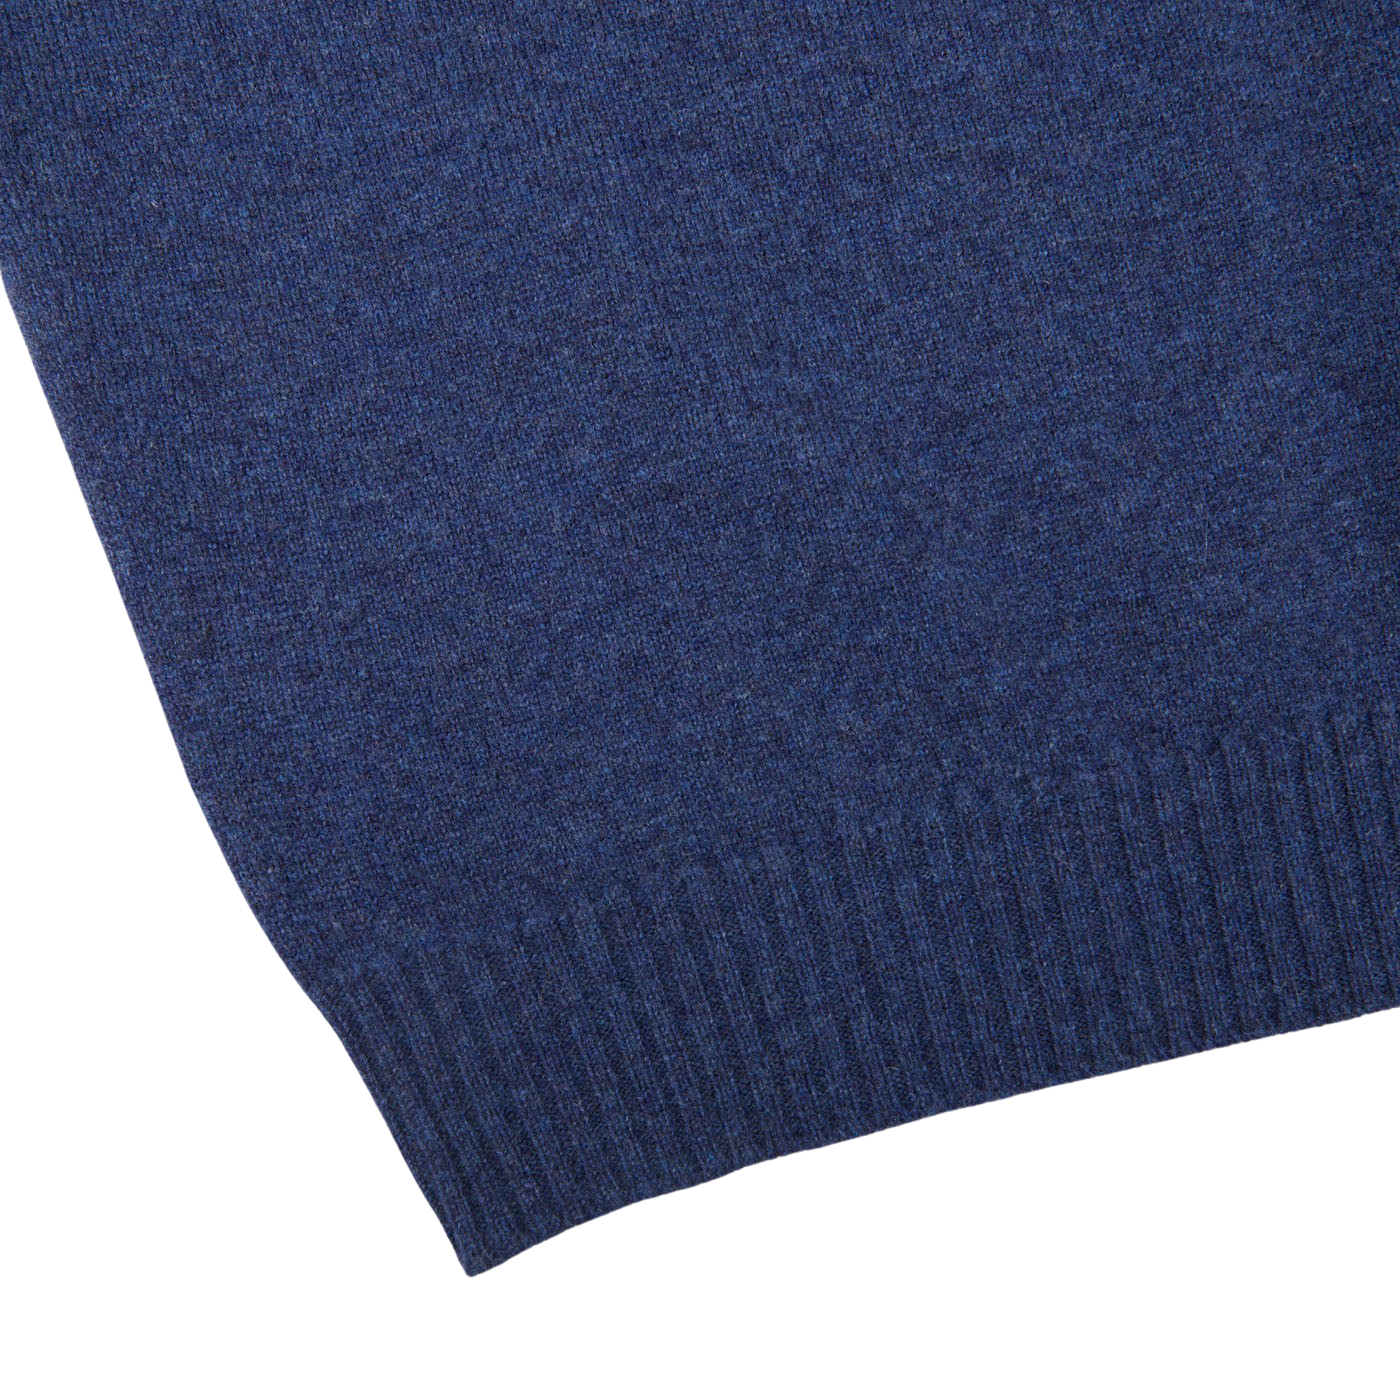 A close up of a William Lockie Rhapsody Blue Crew Neck Lambswool Sweater.